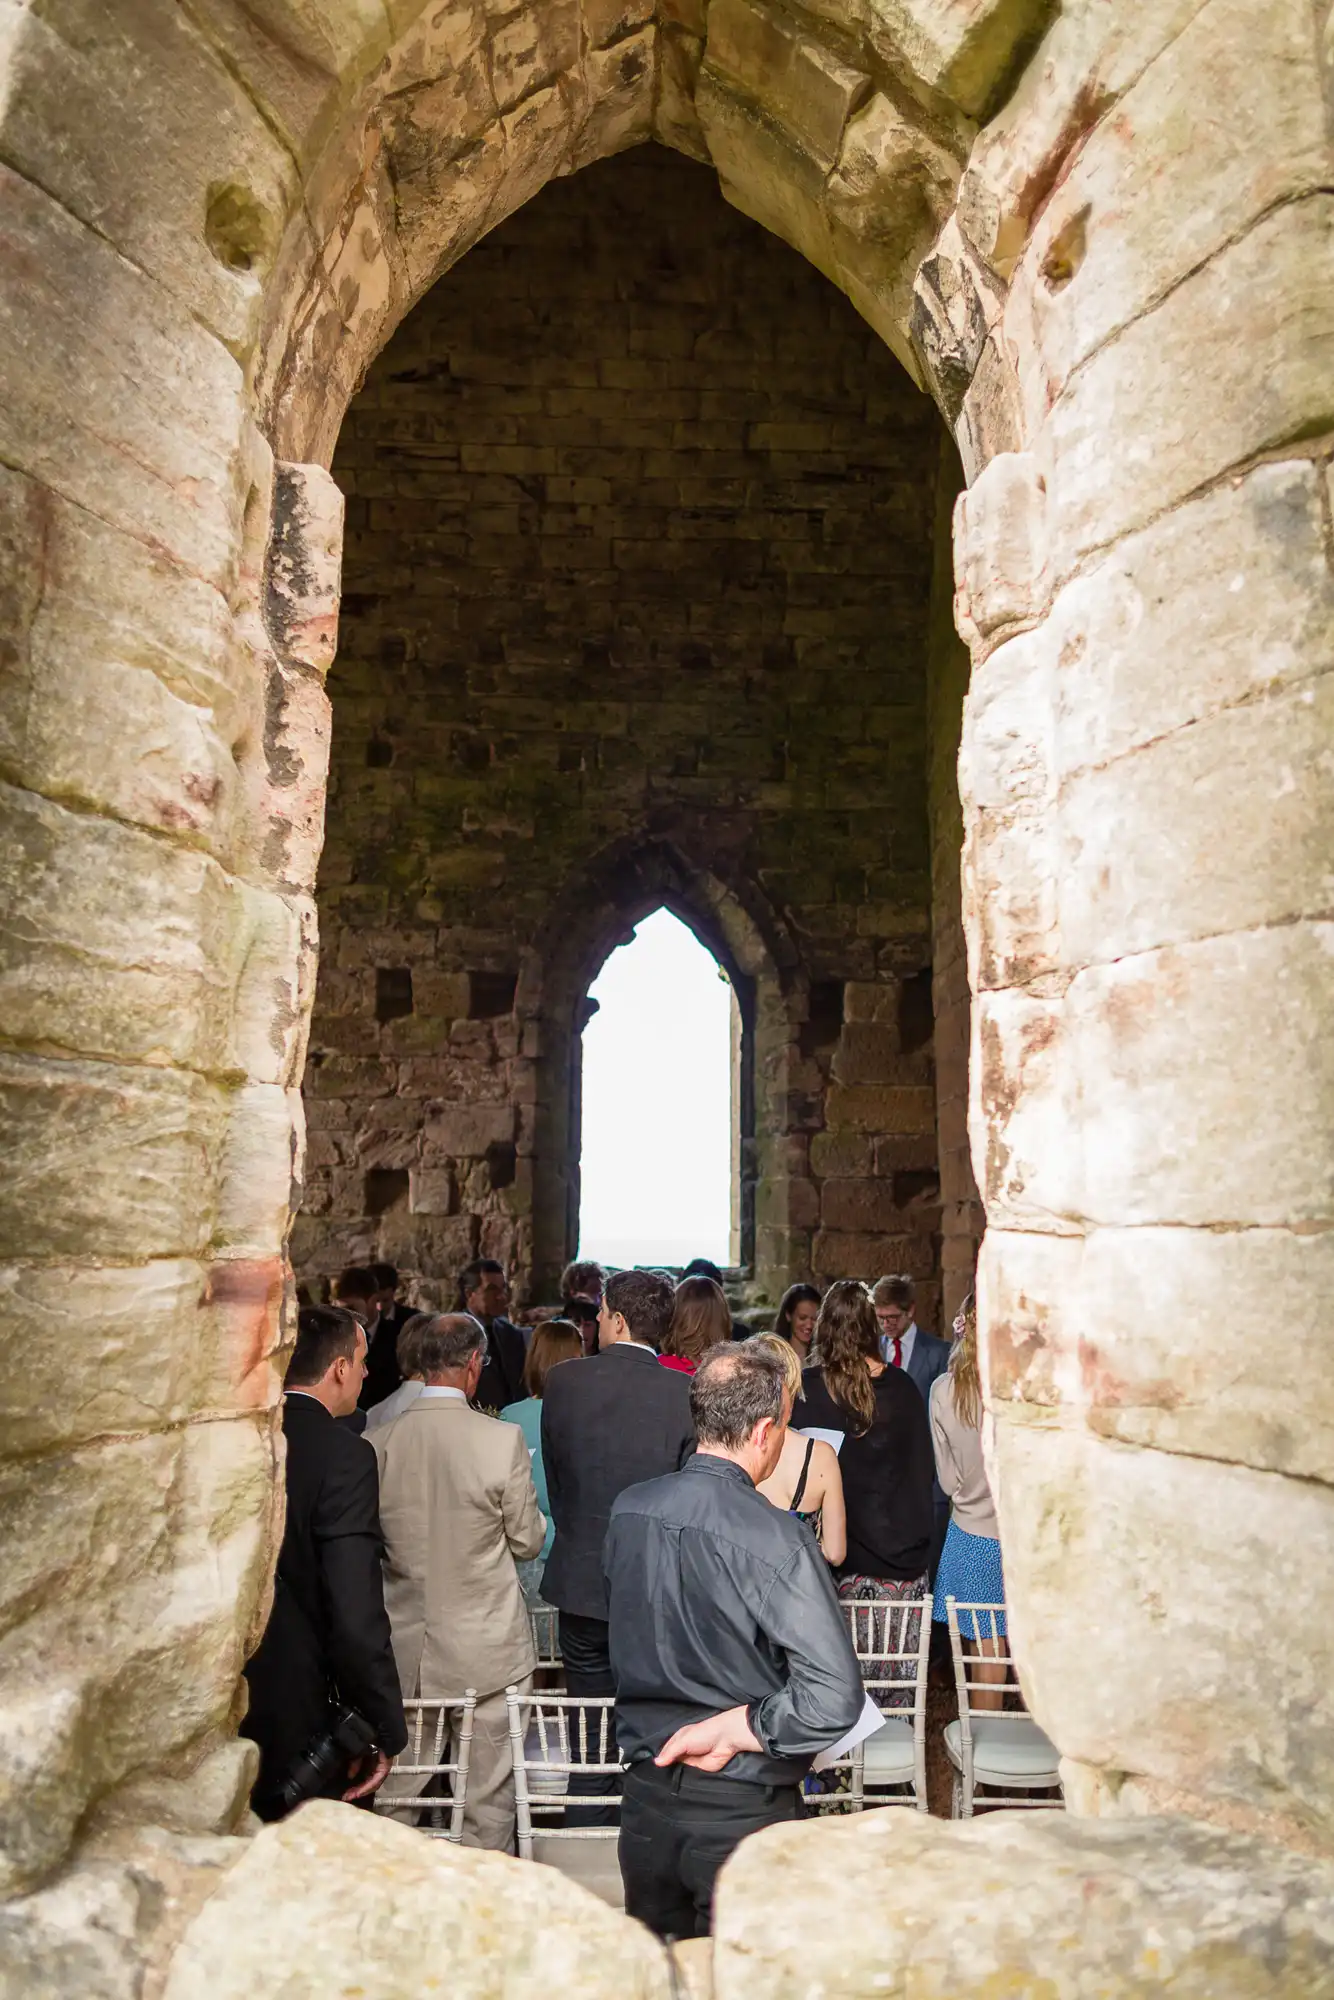 view through the window of the church during the ceremony